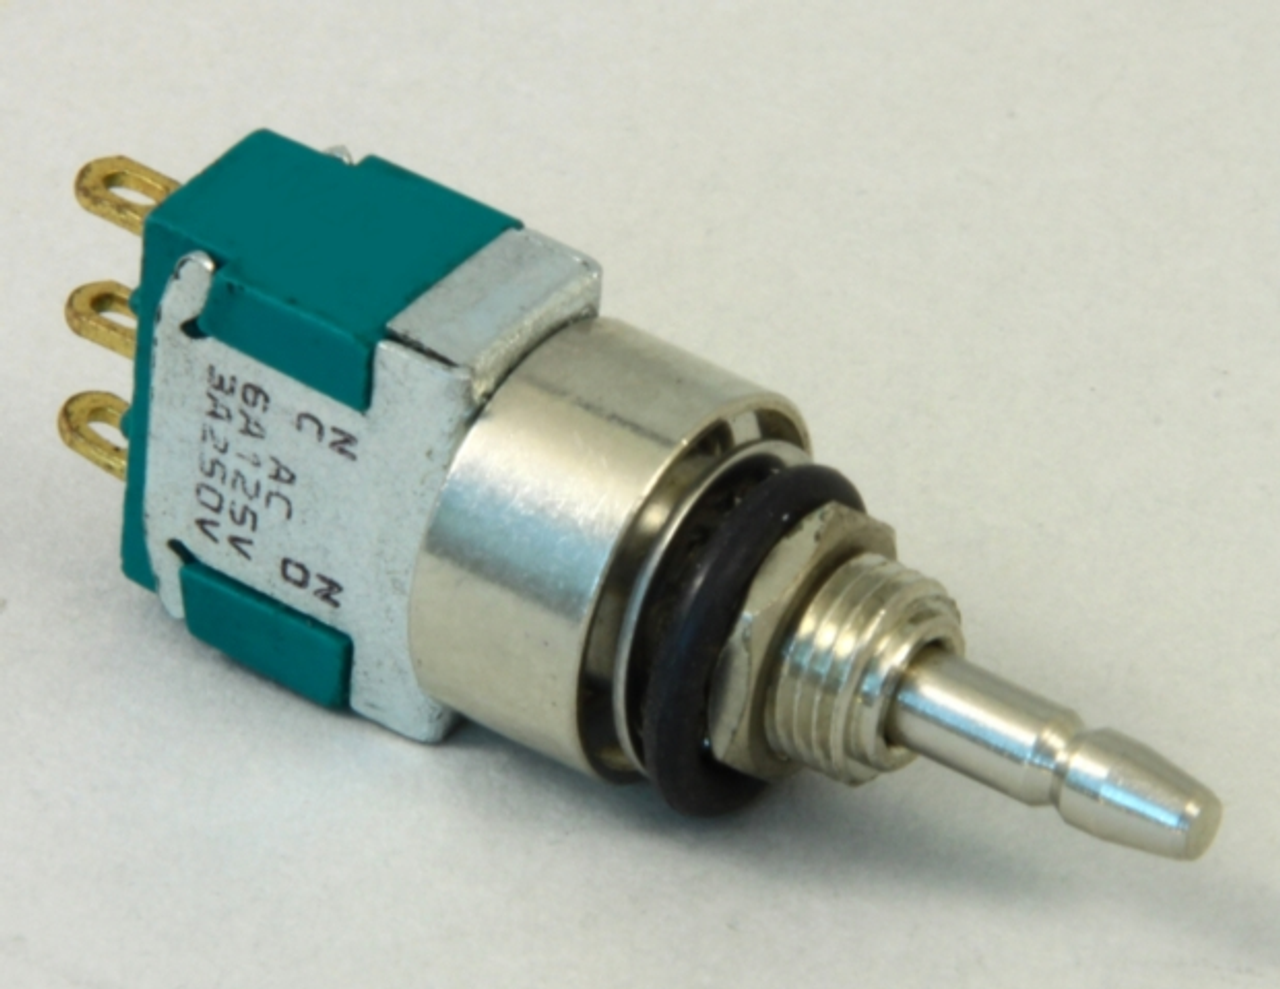 7110200: Taylor-Dunn Aftermarket Switch